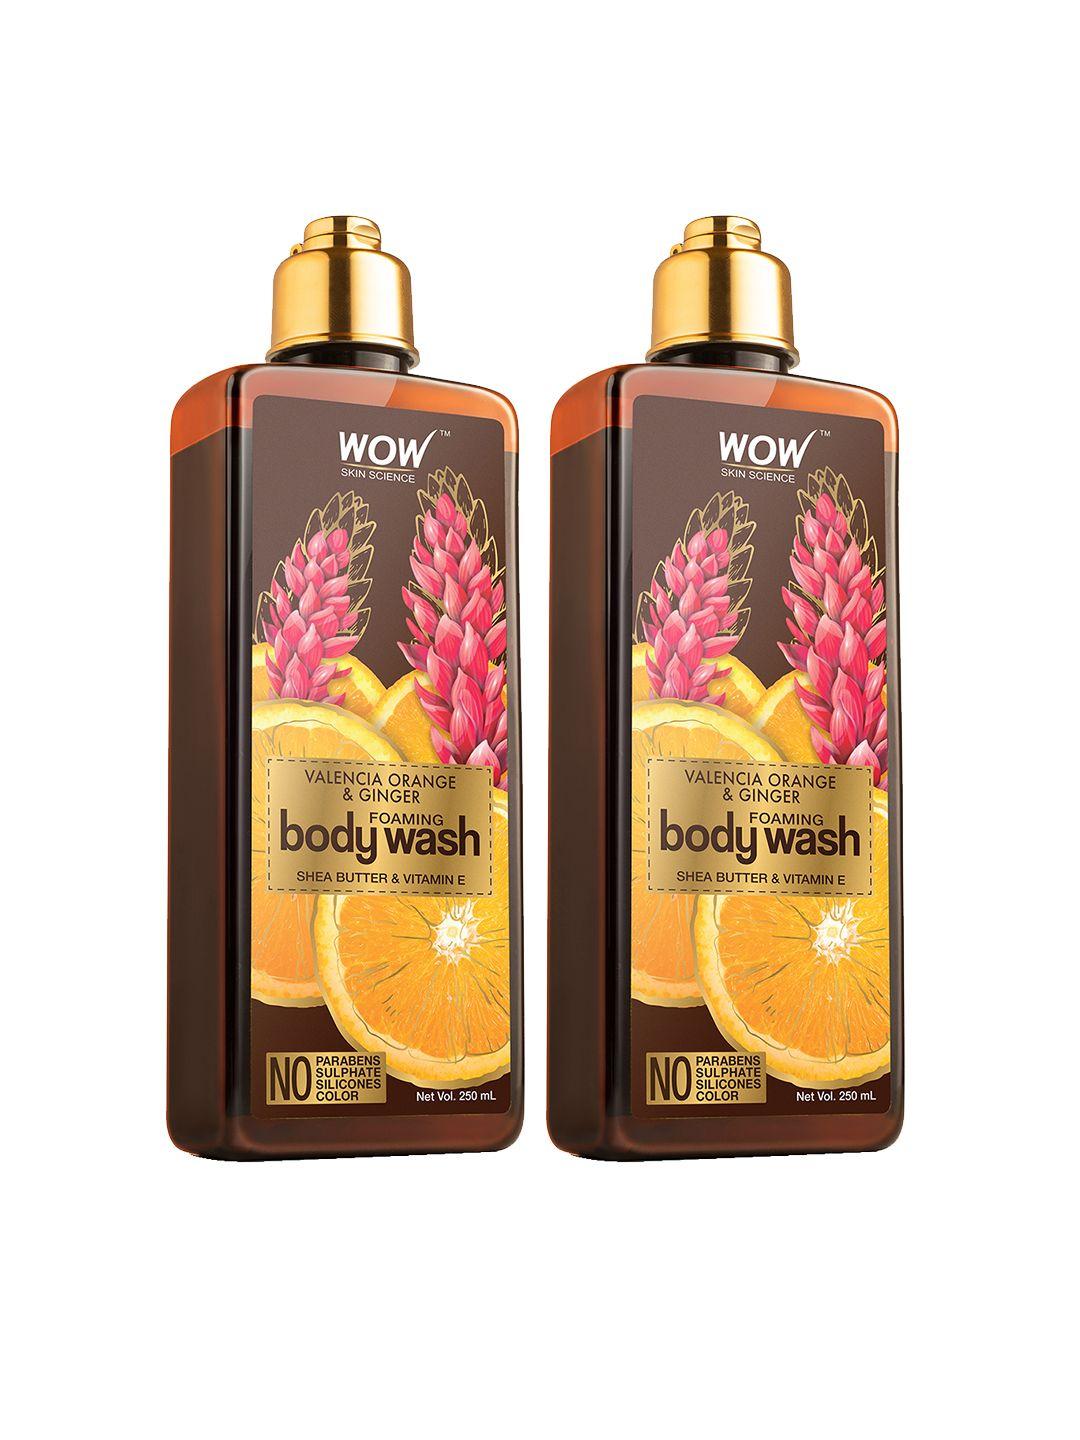 wow skin science set of 2 valencia orange & ginger foaming body washes - 250ml each